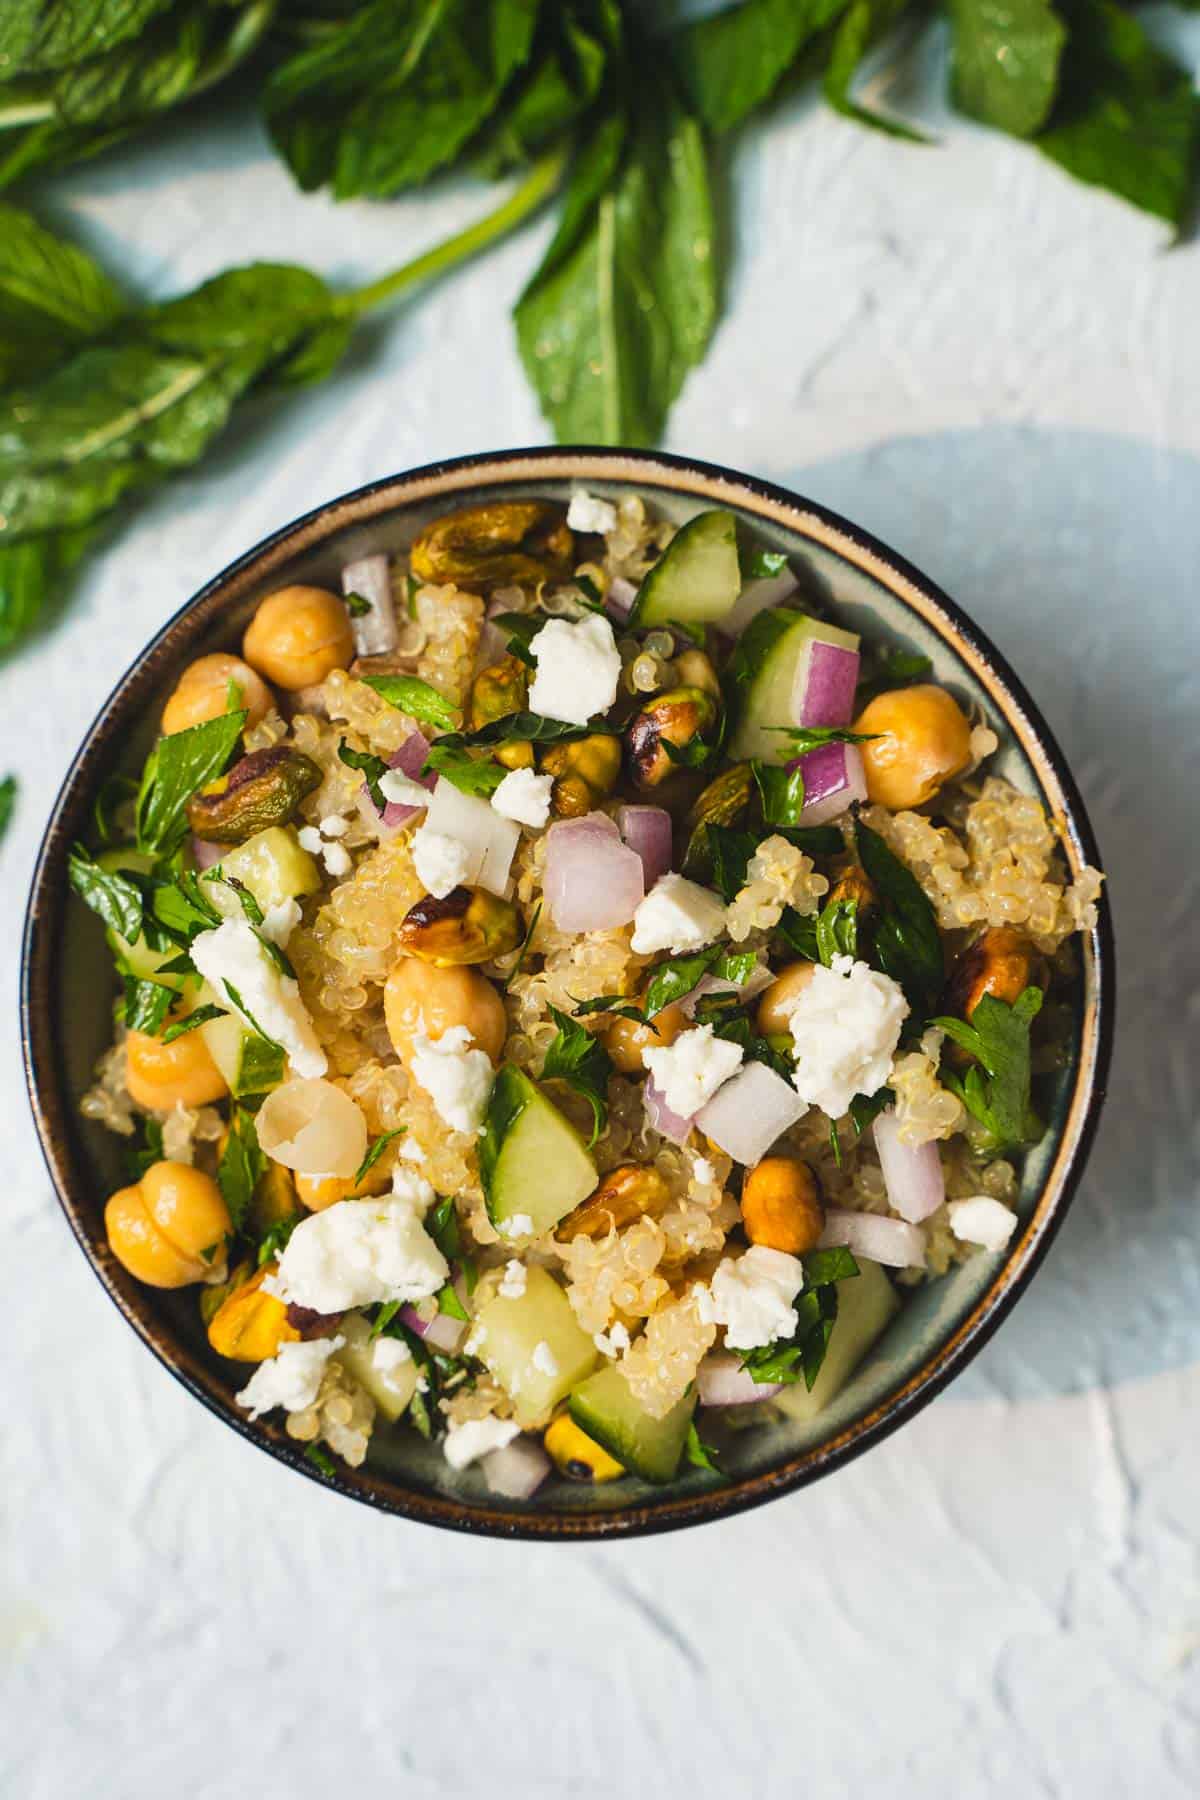 Jenniifer Aniston Salad Recipe made of quinoa,cucumber, fresh herbs, pistachios, chickpeas and feta cheese all tossed in a simple lemon and olive oil dressing in a small bowl on a white table